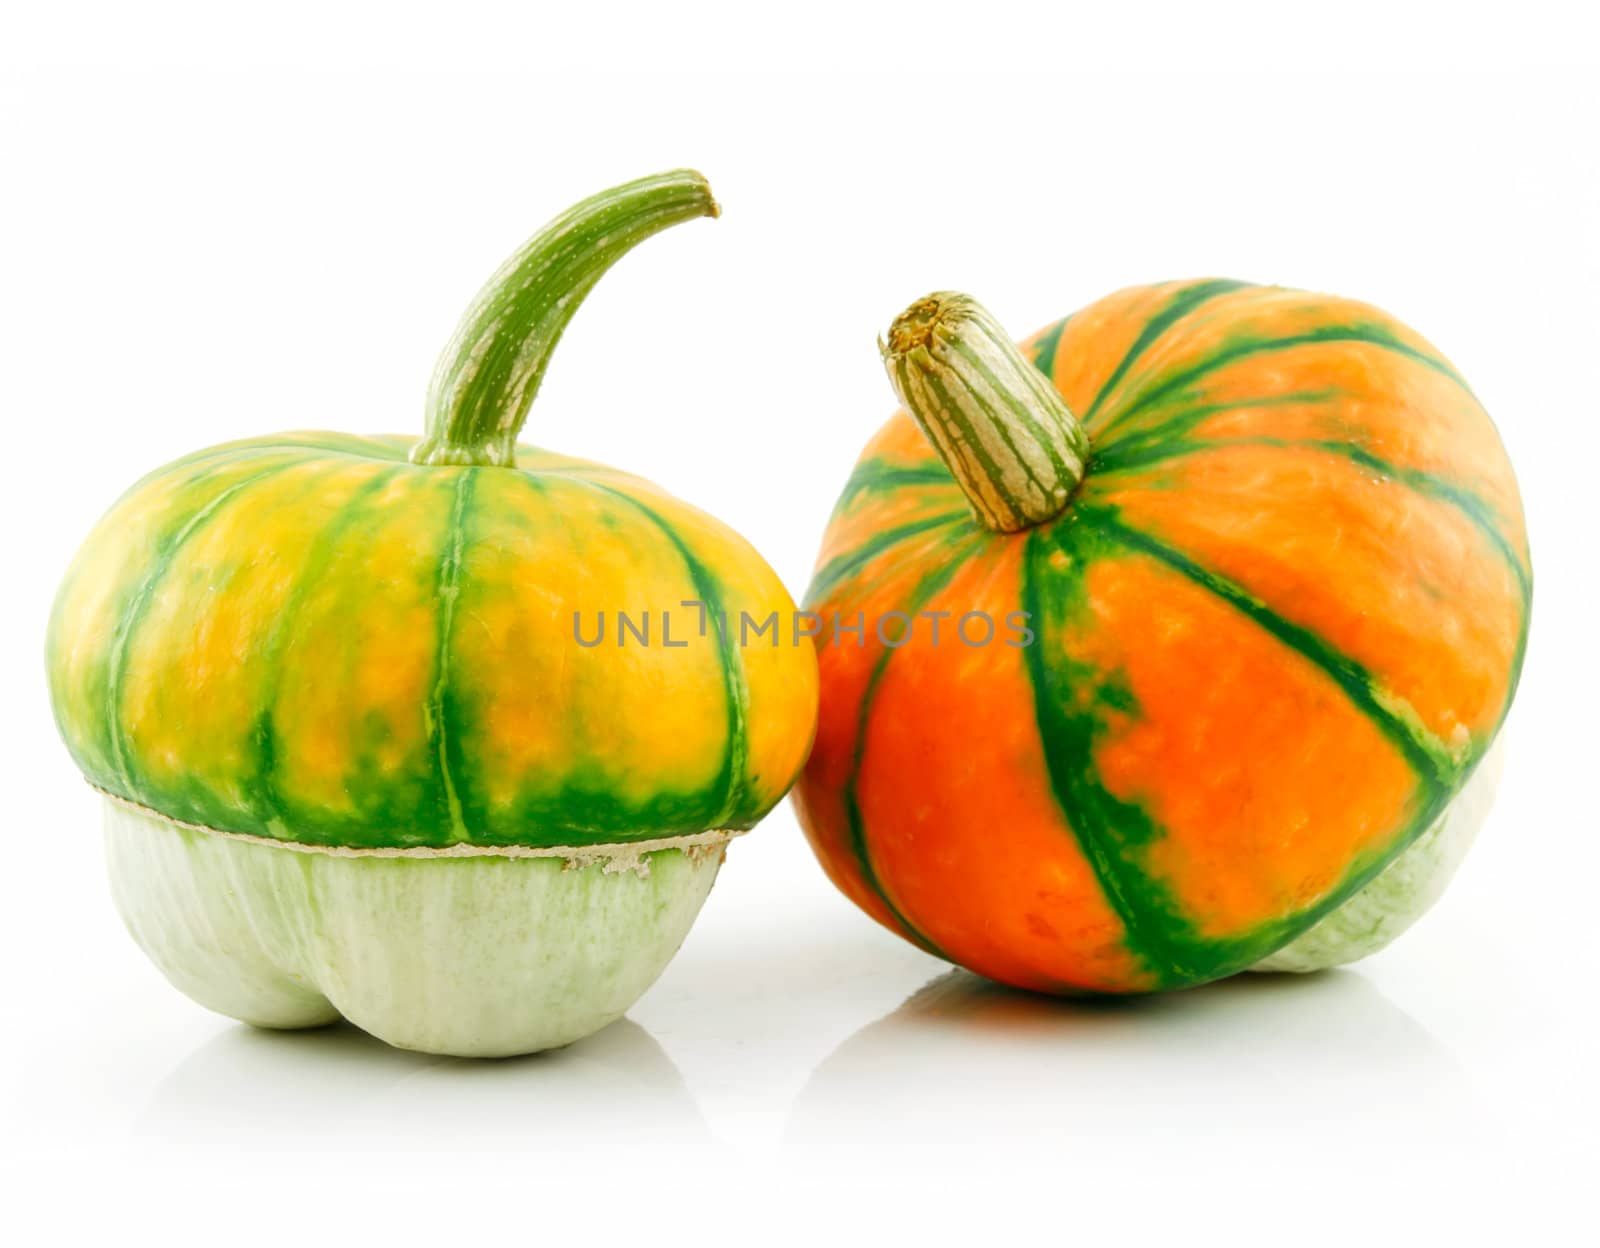 Ripe Gourds Vegetable Hybrid Isolated on White by alphacell